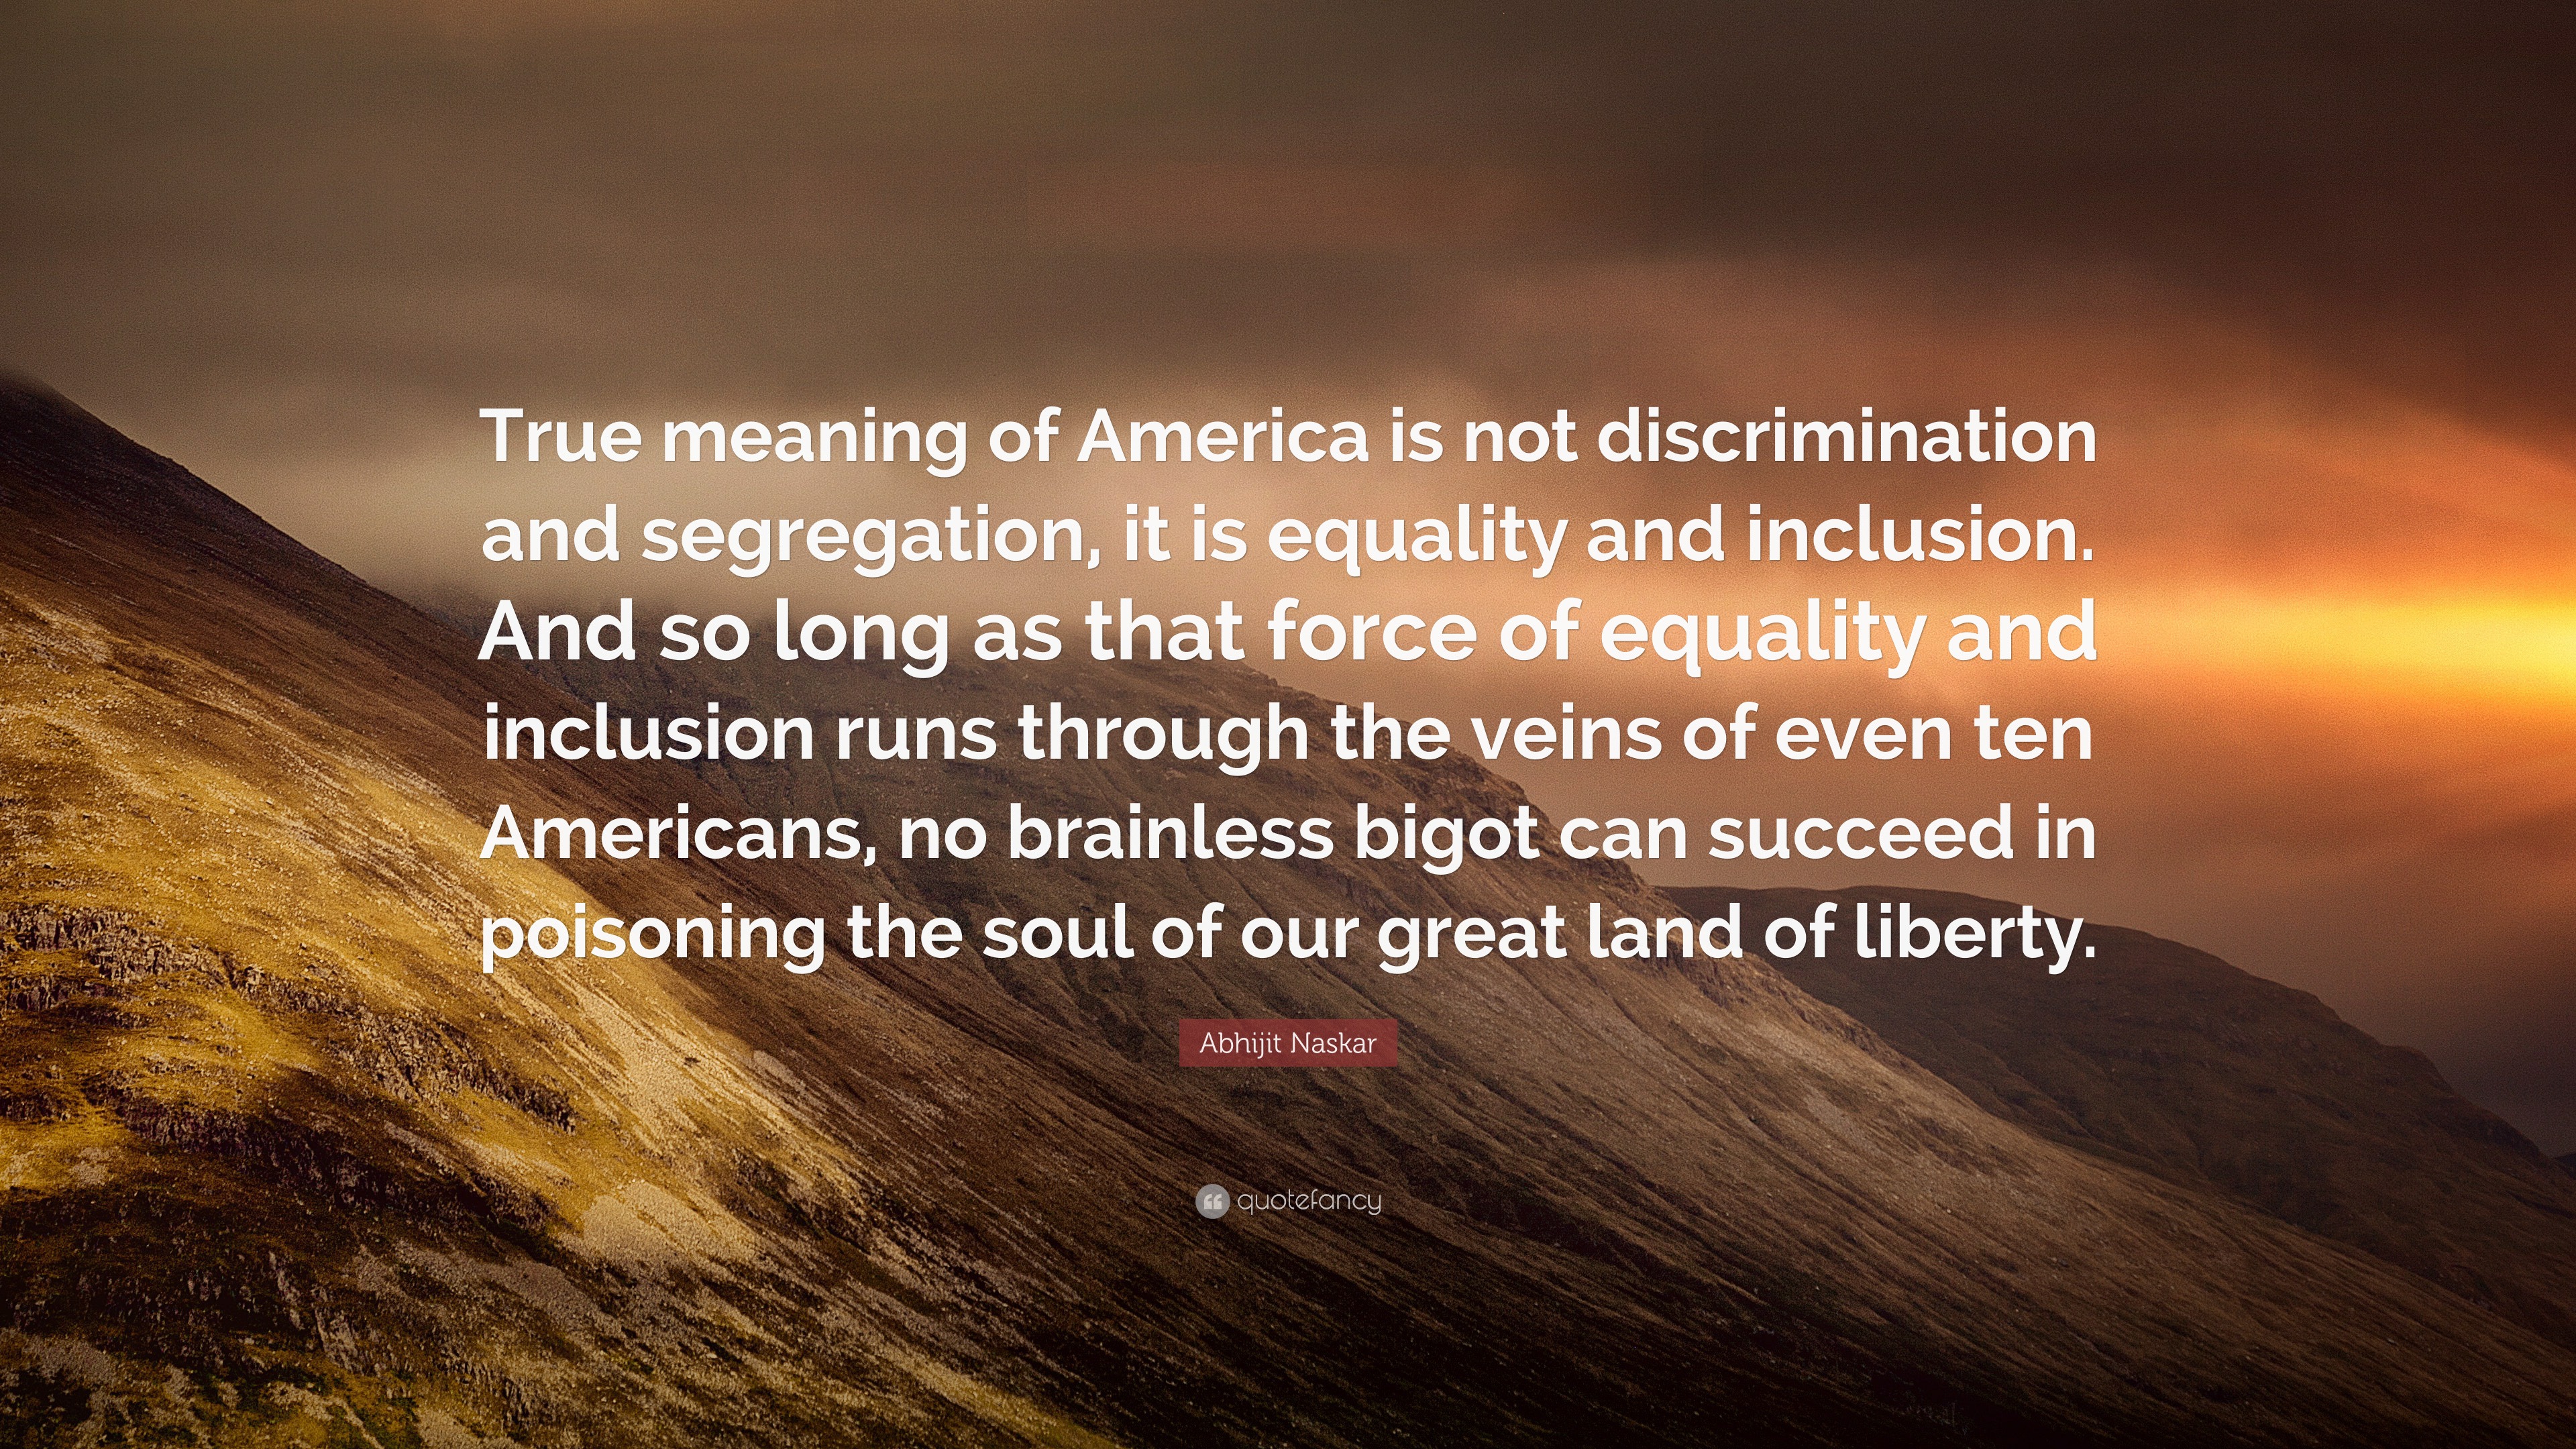 Abhijit Naskar Quote: “True meaning of America is not discrimination and segregation, it is equality inclusion. And so as that force o...”